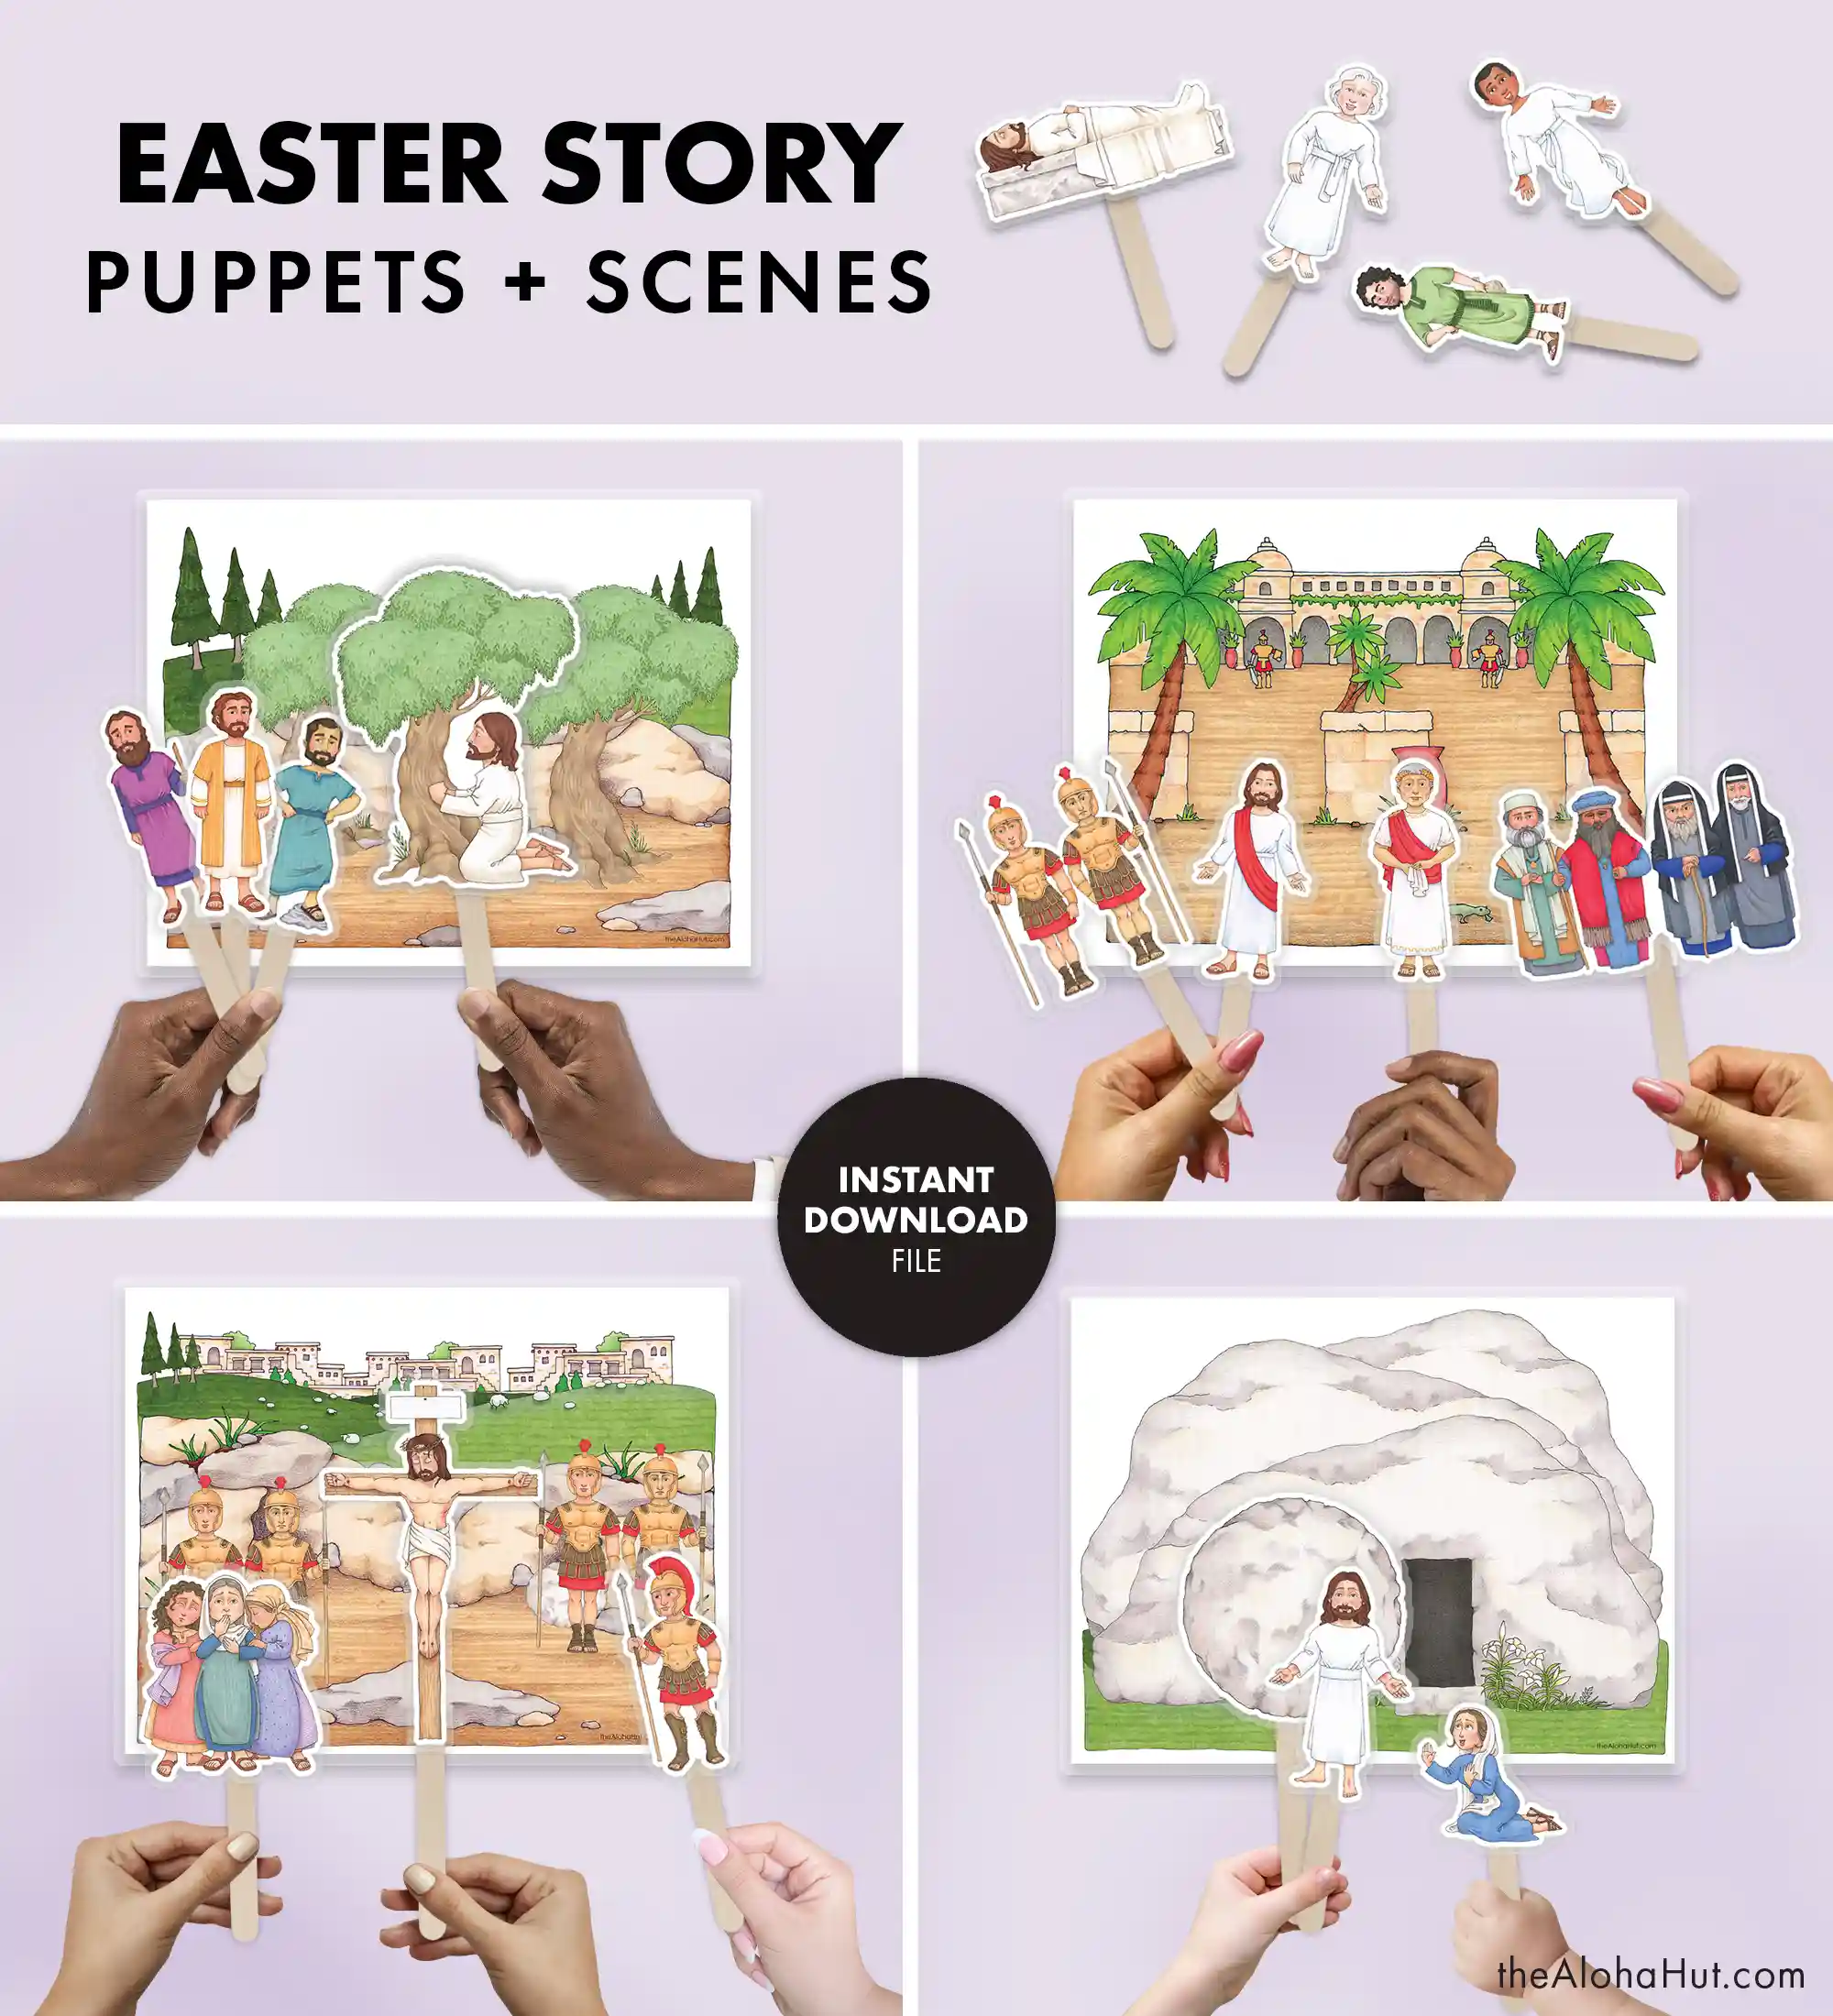 Easter story puppets and scenes to help kids learn the Easter story and tell about the resurrection of Jesus Christ. These Easter story puppets and scenes are a great lesson help and can be used at home, church, or Bible school. Great for older kids or even for younger kids to learn about Jesus and His death and resurrection.